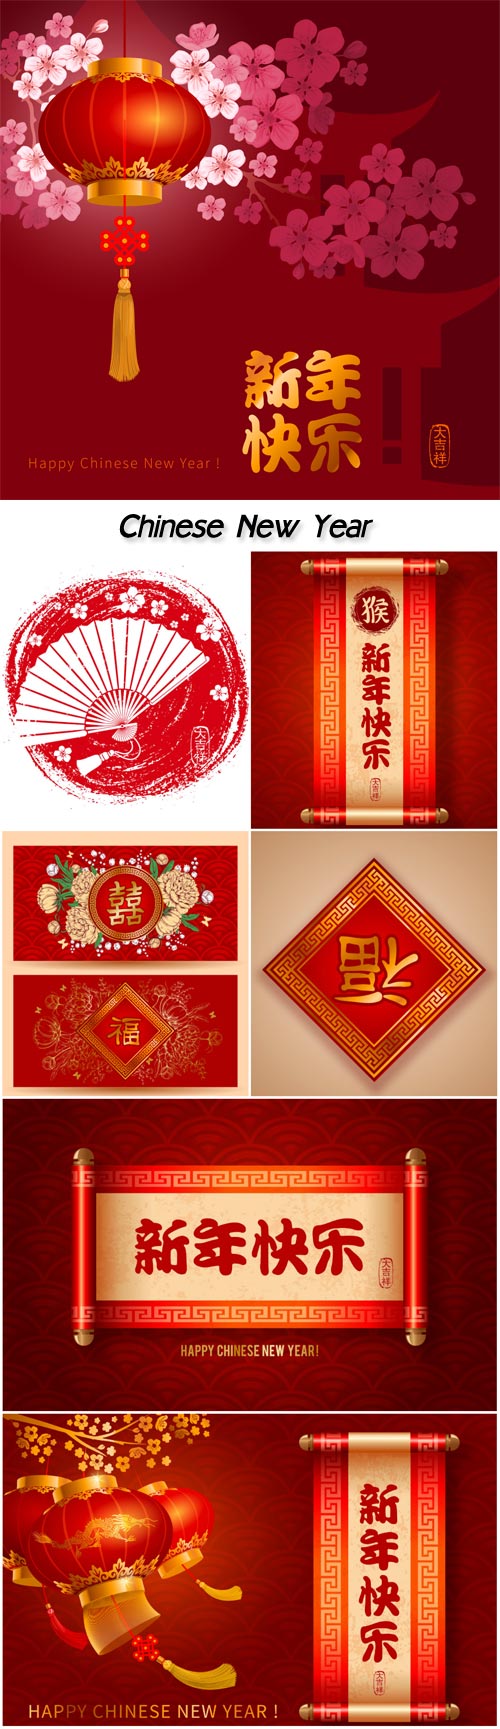 Chinese New Year festive vector card with red lanterns